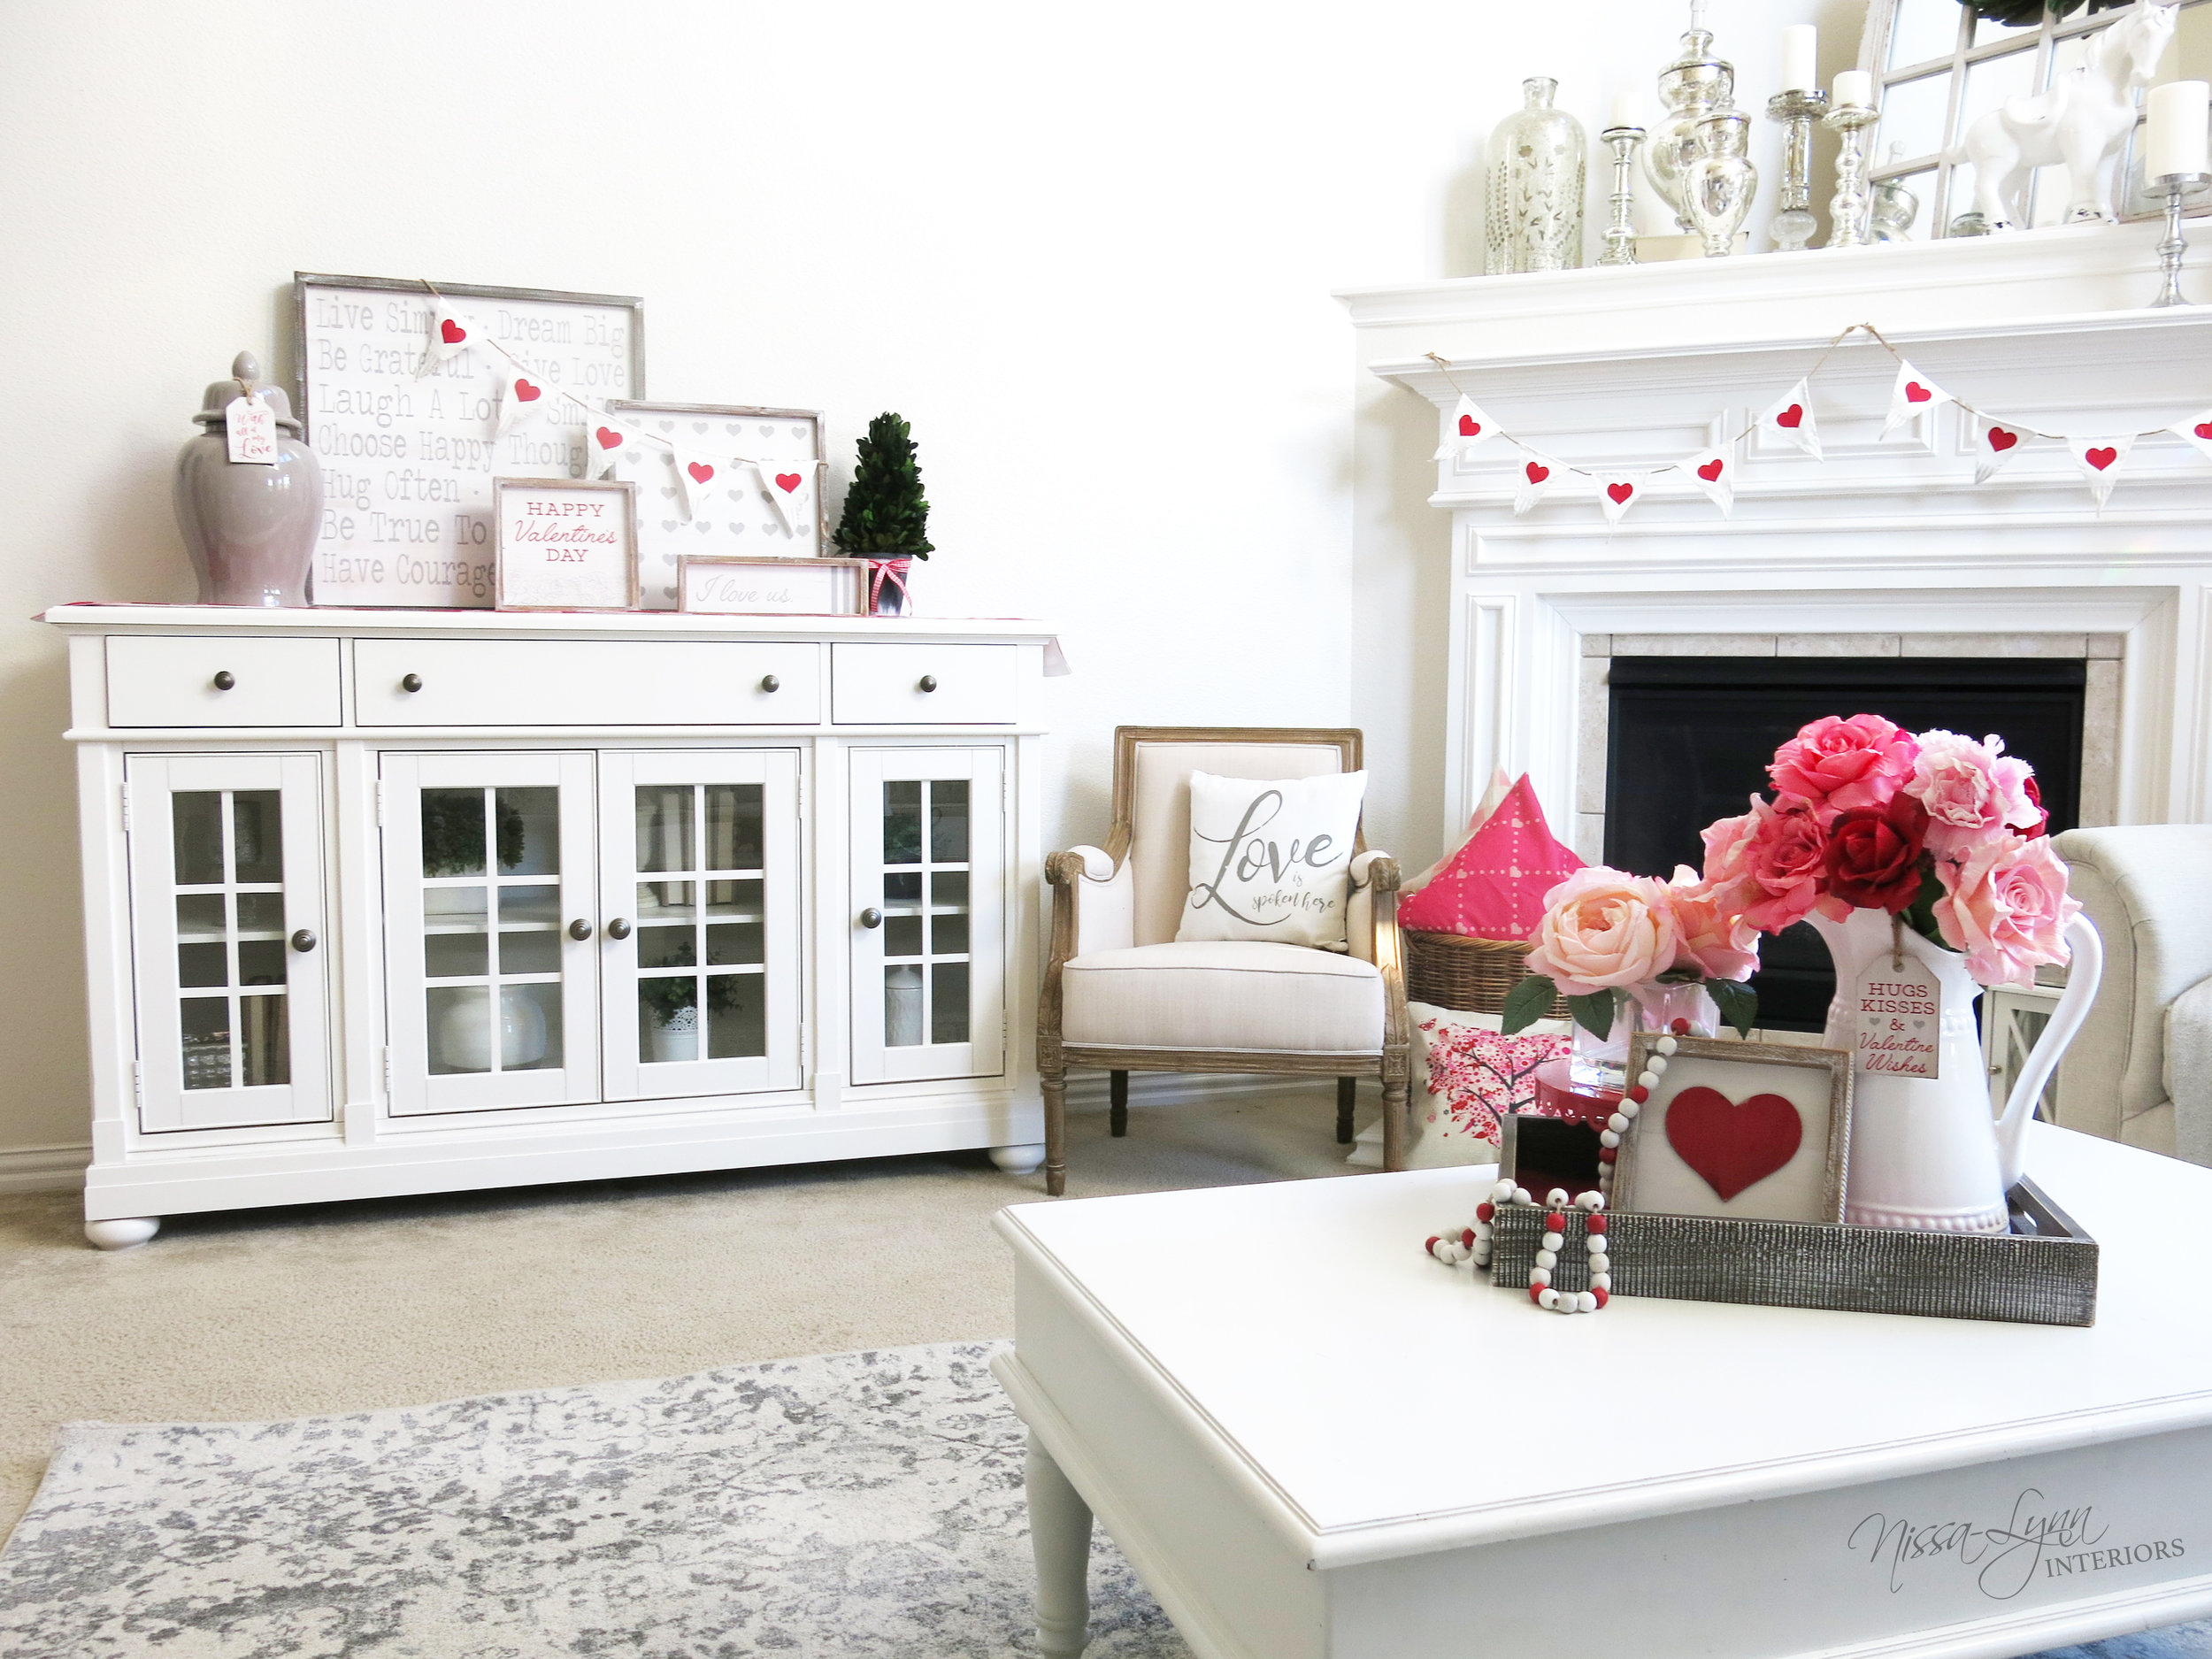 A Pink Valentine's Day Table Decor & Ideas - The Pink Dream